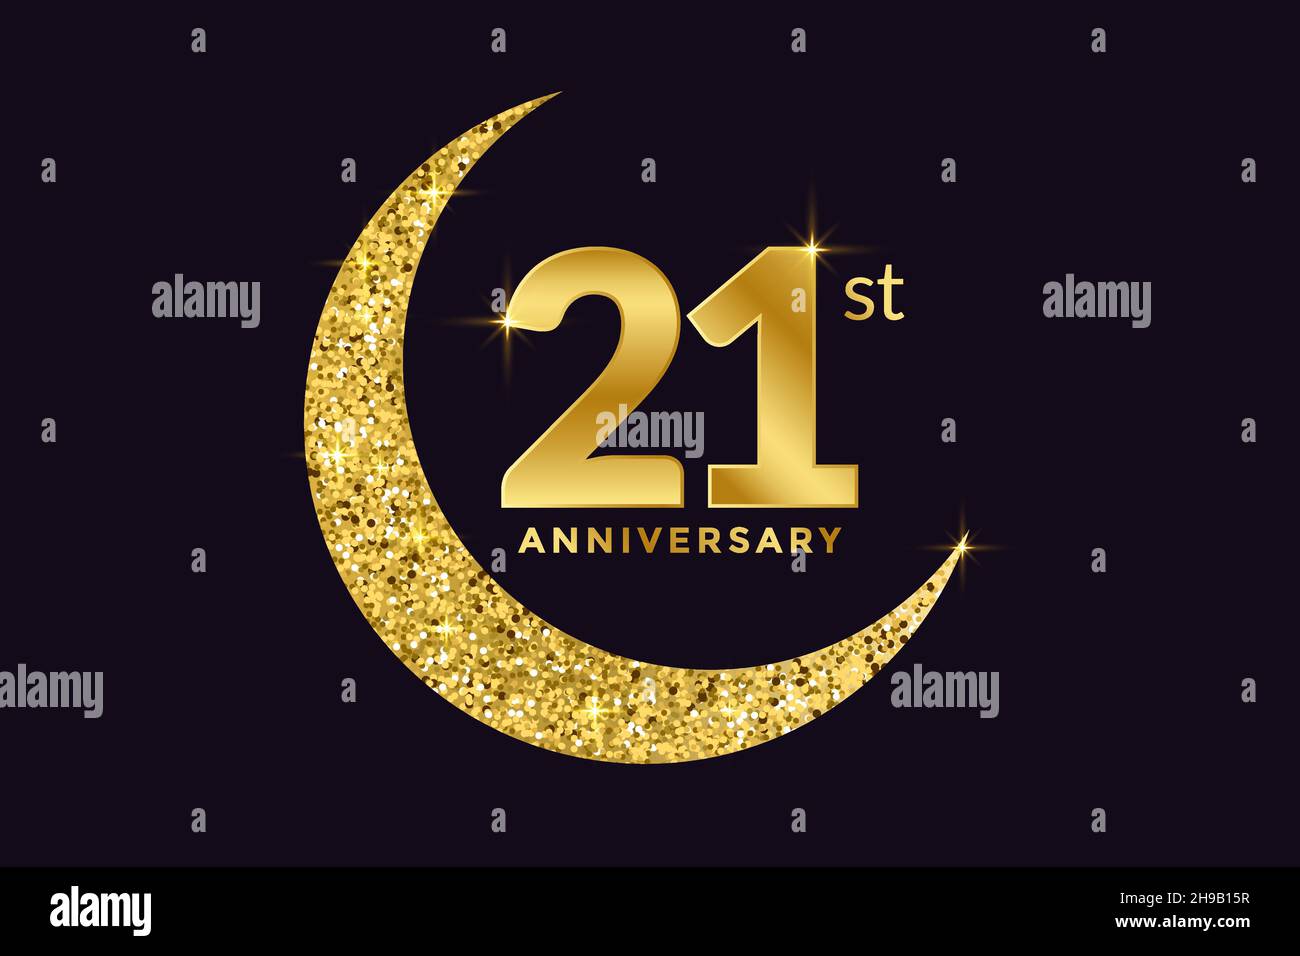 Twenty One Years Anniversary Celebration Golden Emblem in Black Background. Number 21 Luxury Style Banner Isolated Vector. Stock Vector